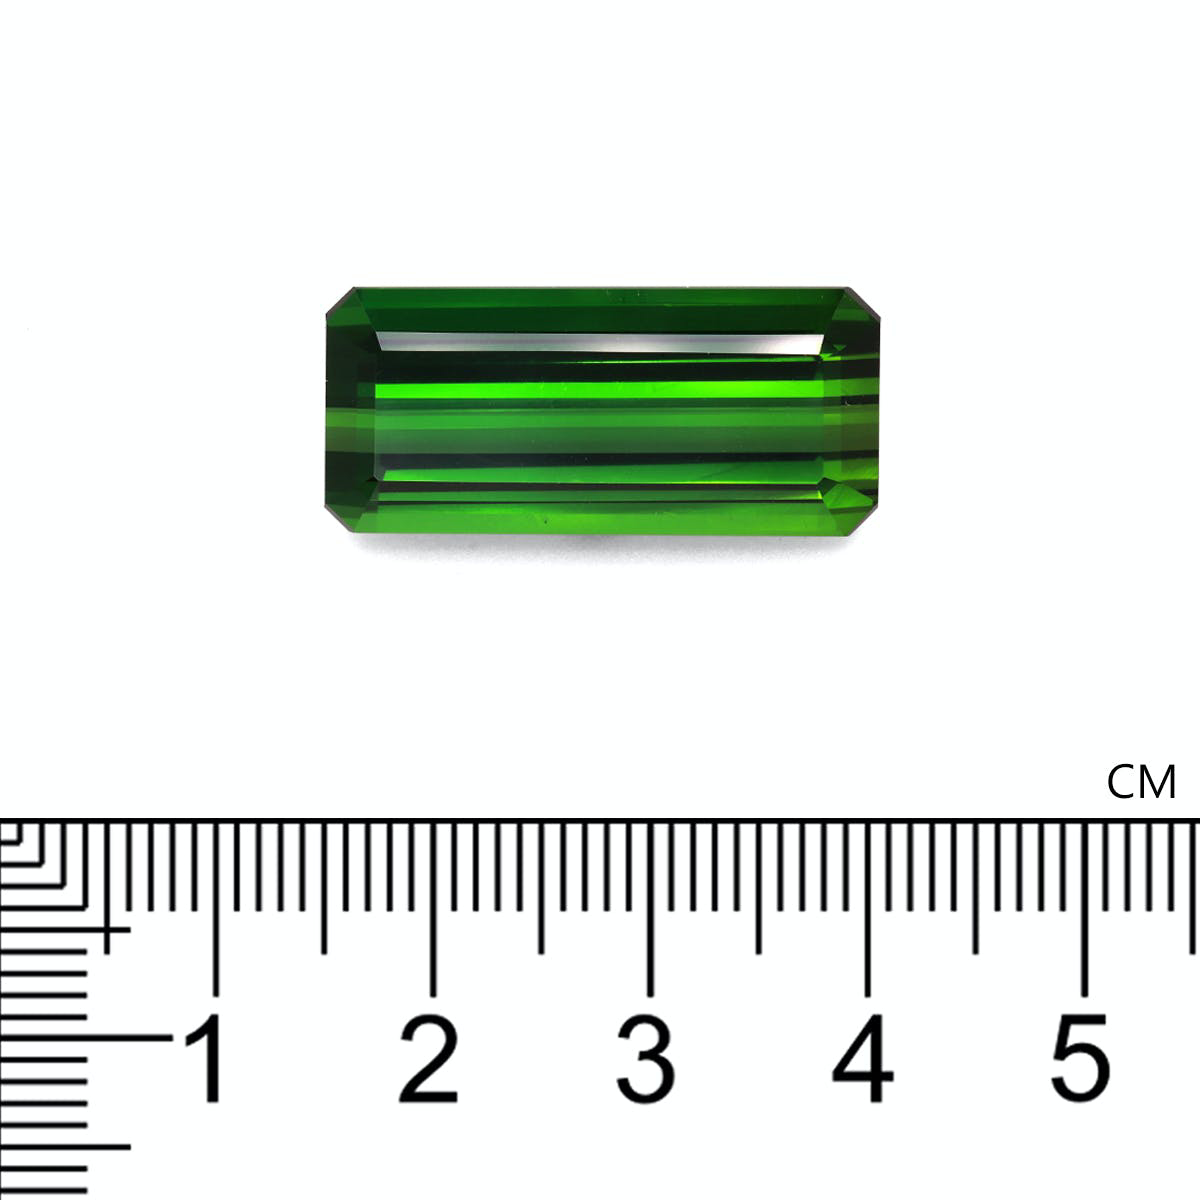 Picture of Moss Green Tourmaline 23.13ct (TG0890)